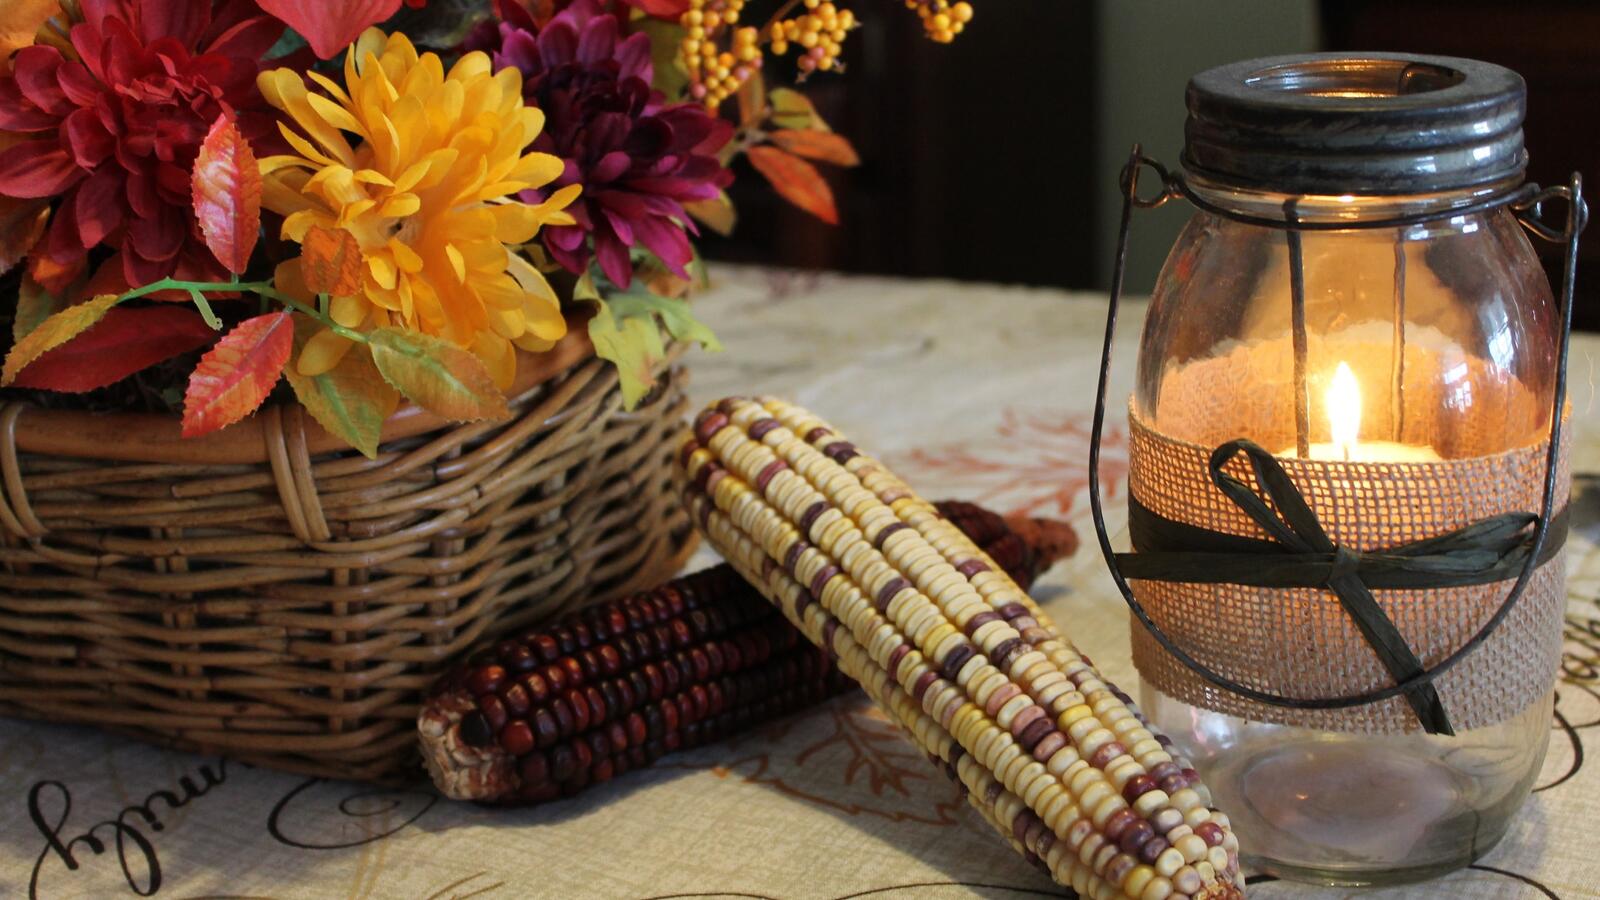 Free photo Fruits of corn next to a basket of flowers